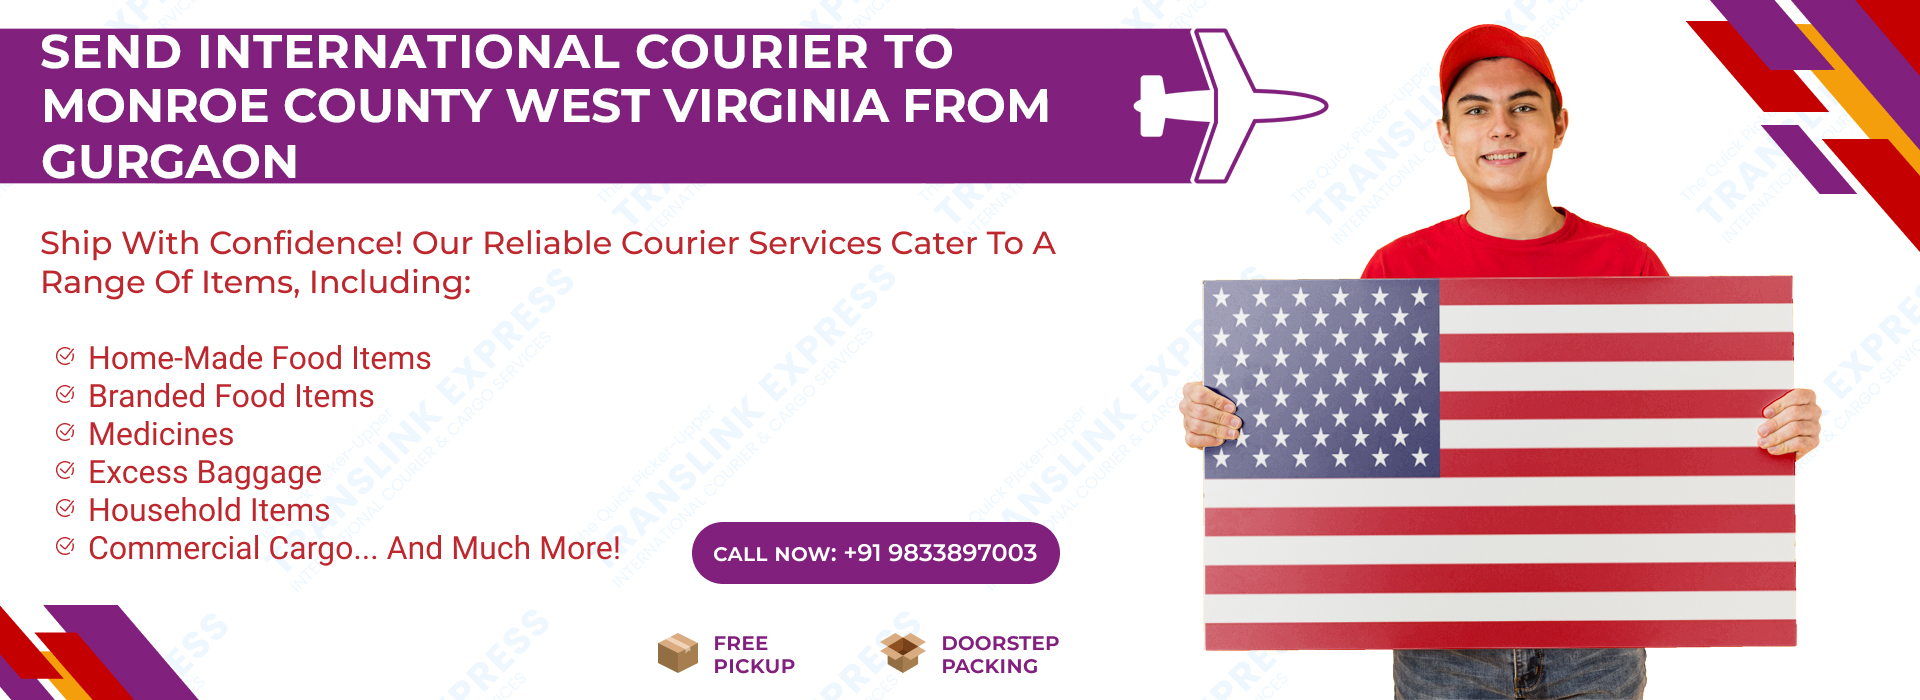 Courier to Monroe County West Virginia From Gurgaon